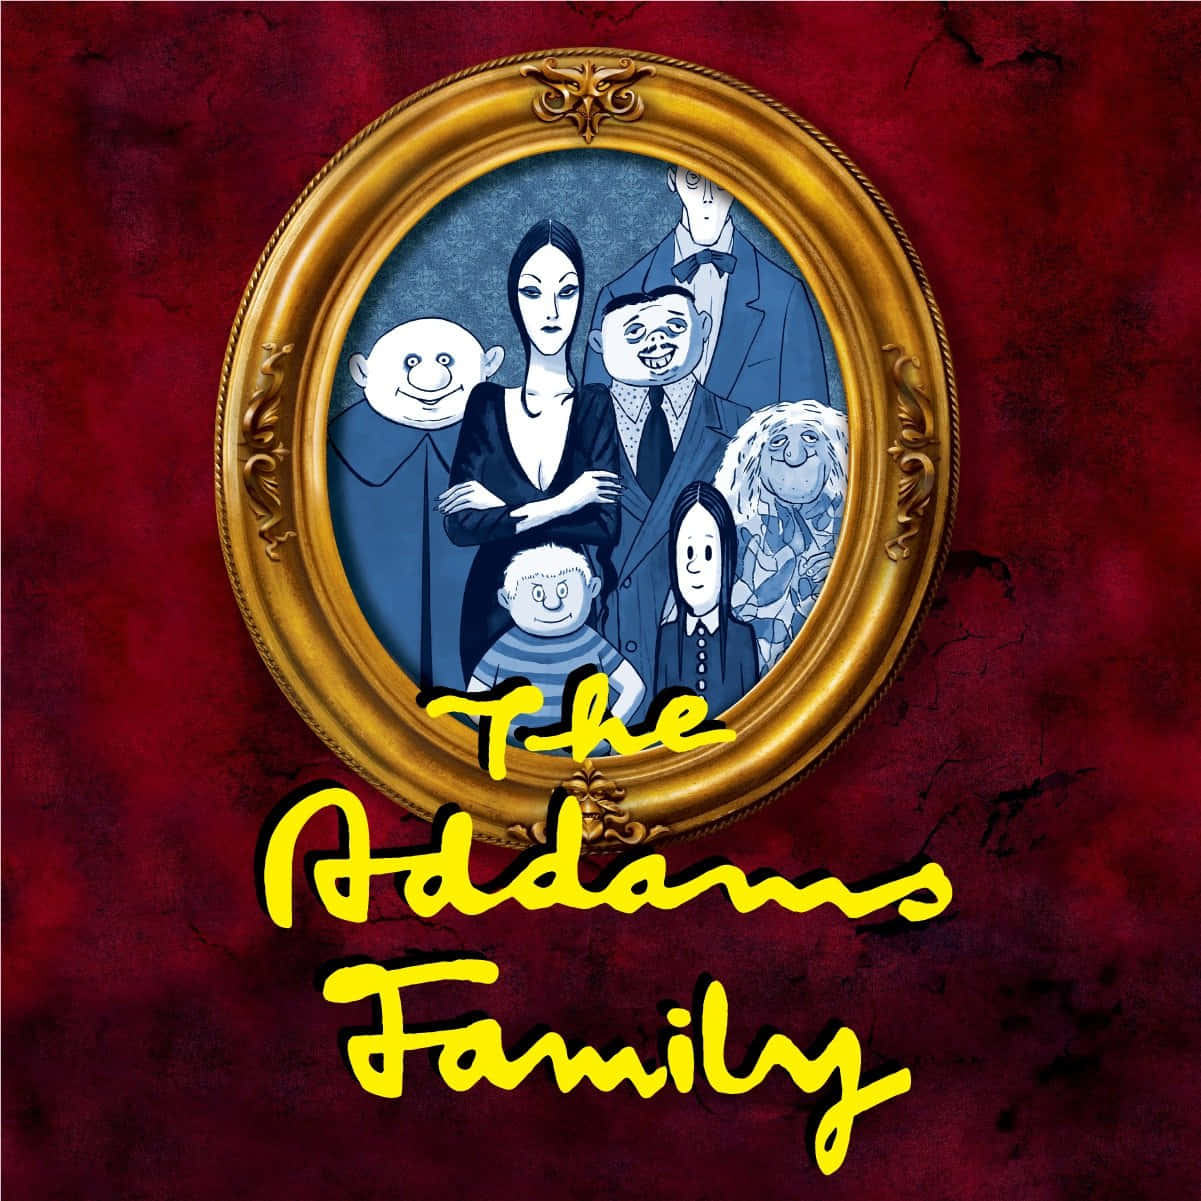 Download The Addams Family - The Movie | Wallpapers.com